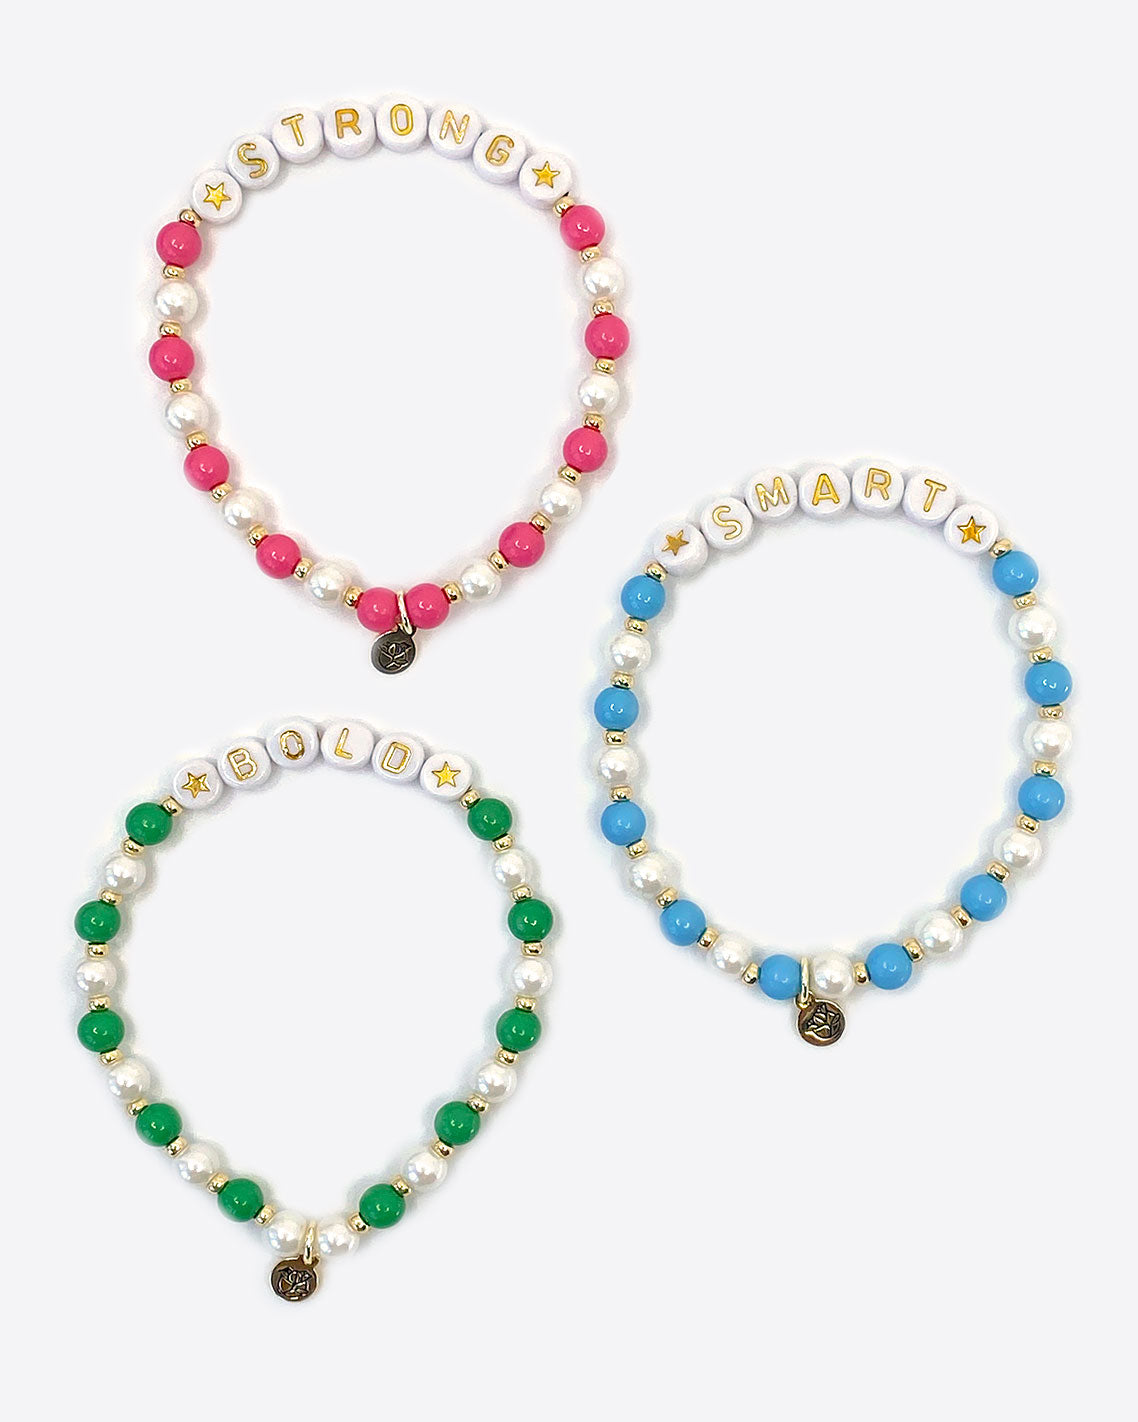 Bold, Smart, and Strong Beaded Bracelet (Set of 3)